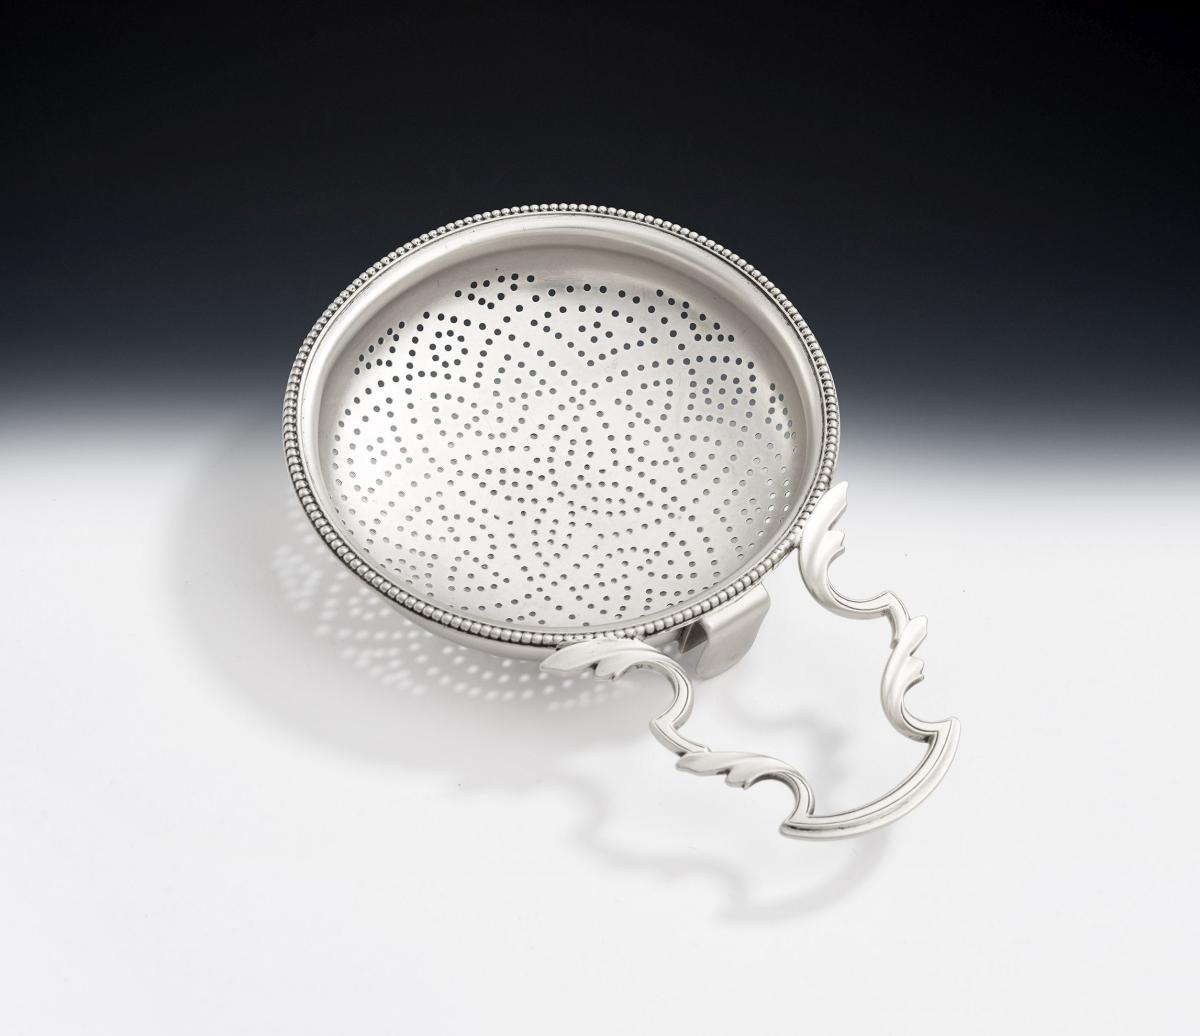 A fine George III Beaded Strainer made in London in 1783 by William Plummer